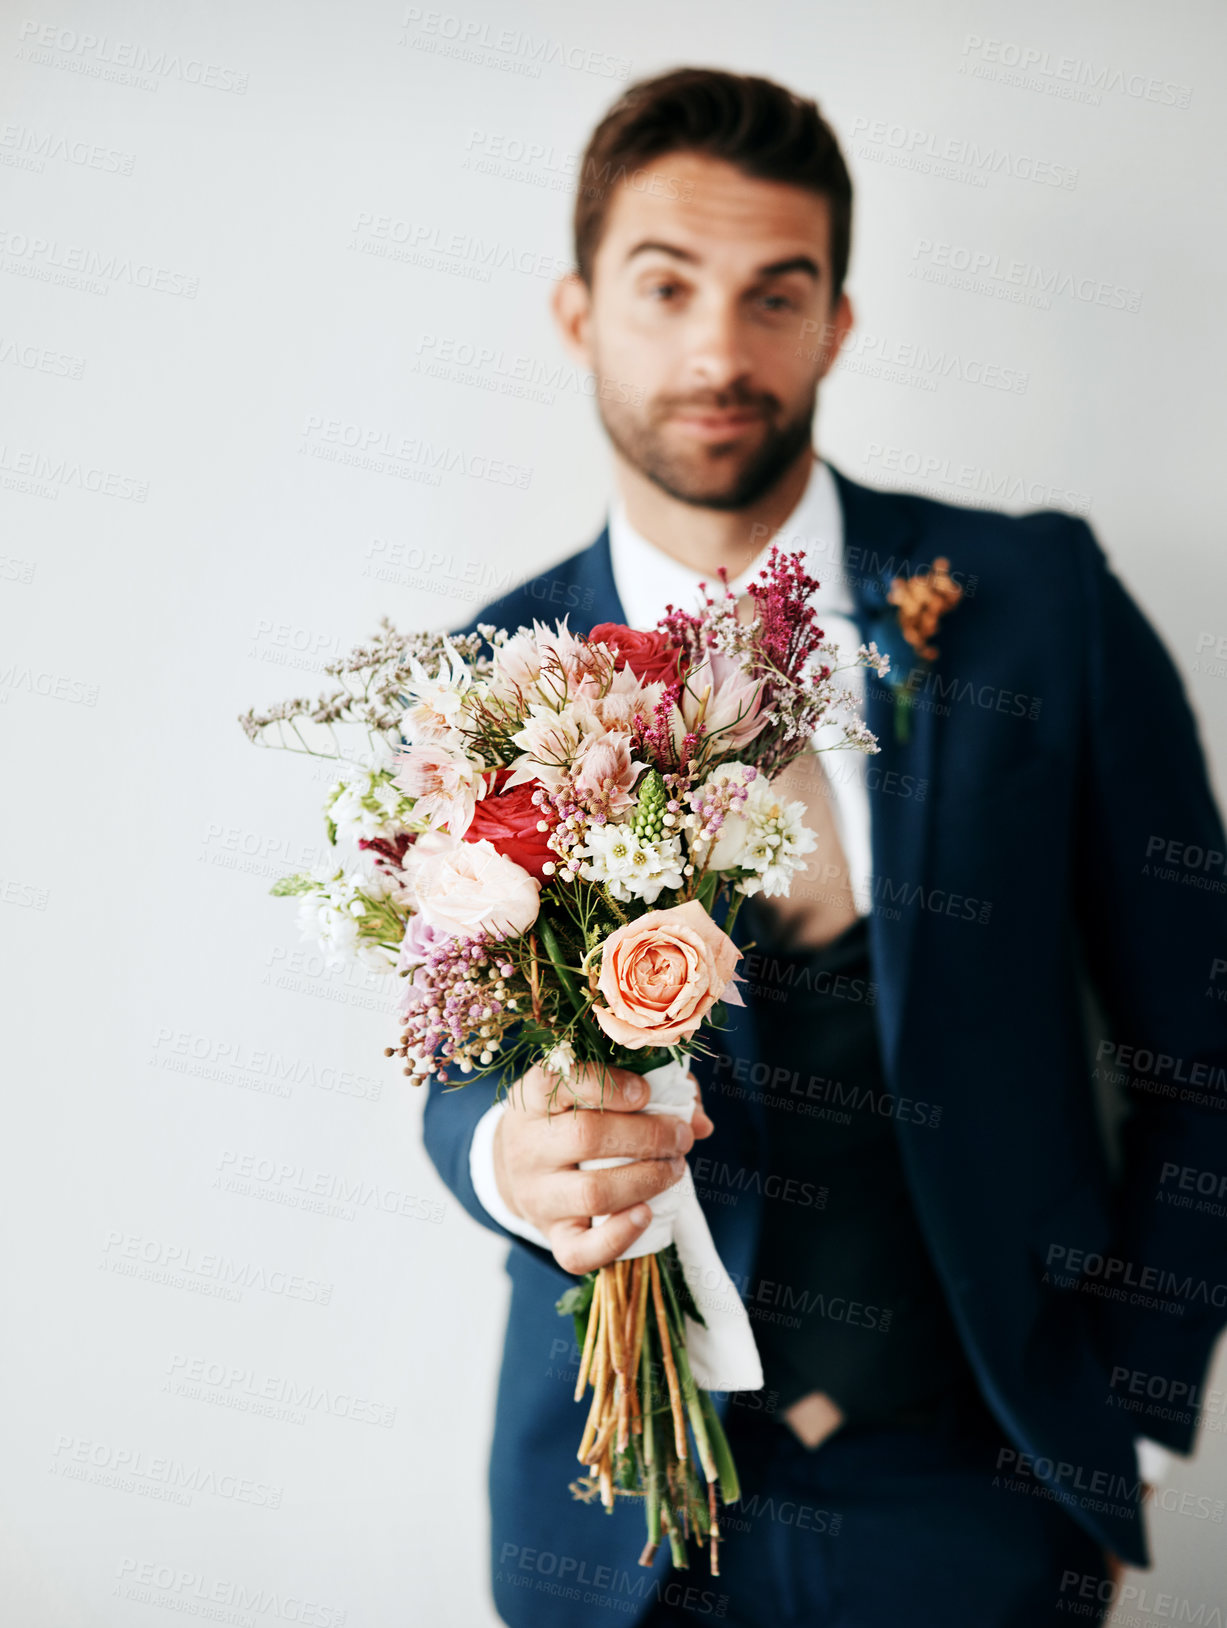 Buy stock photo Studio shot of a handsome young groom holding a bunch of flowers a gray background